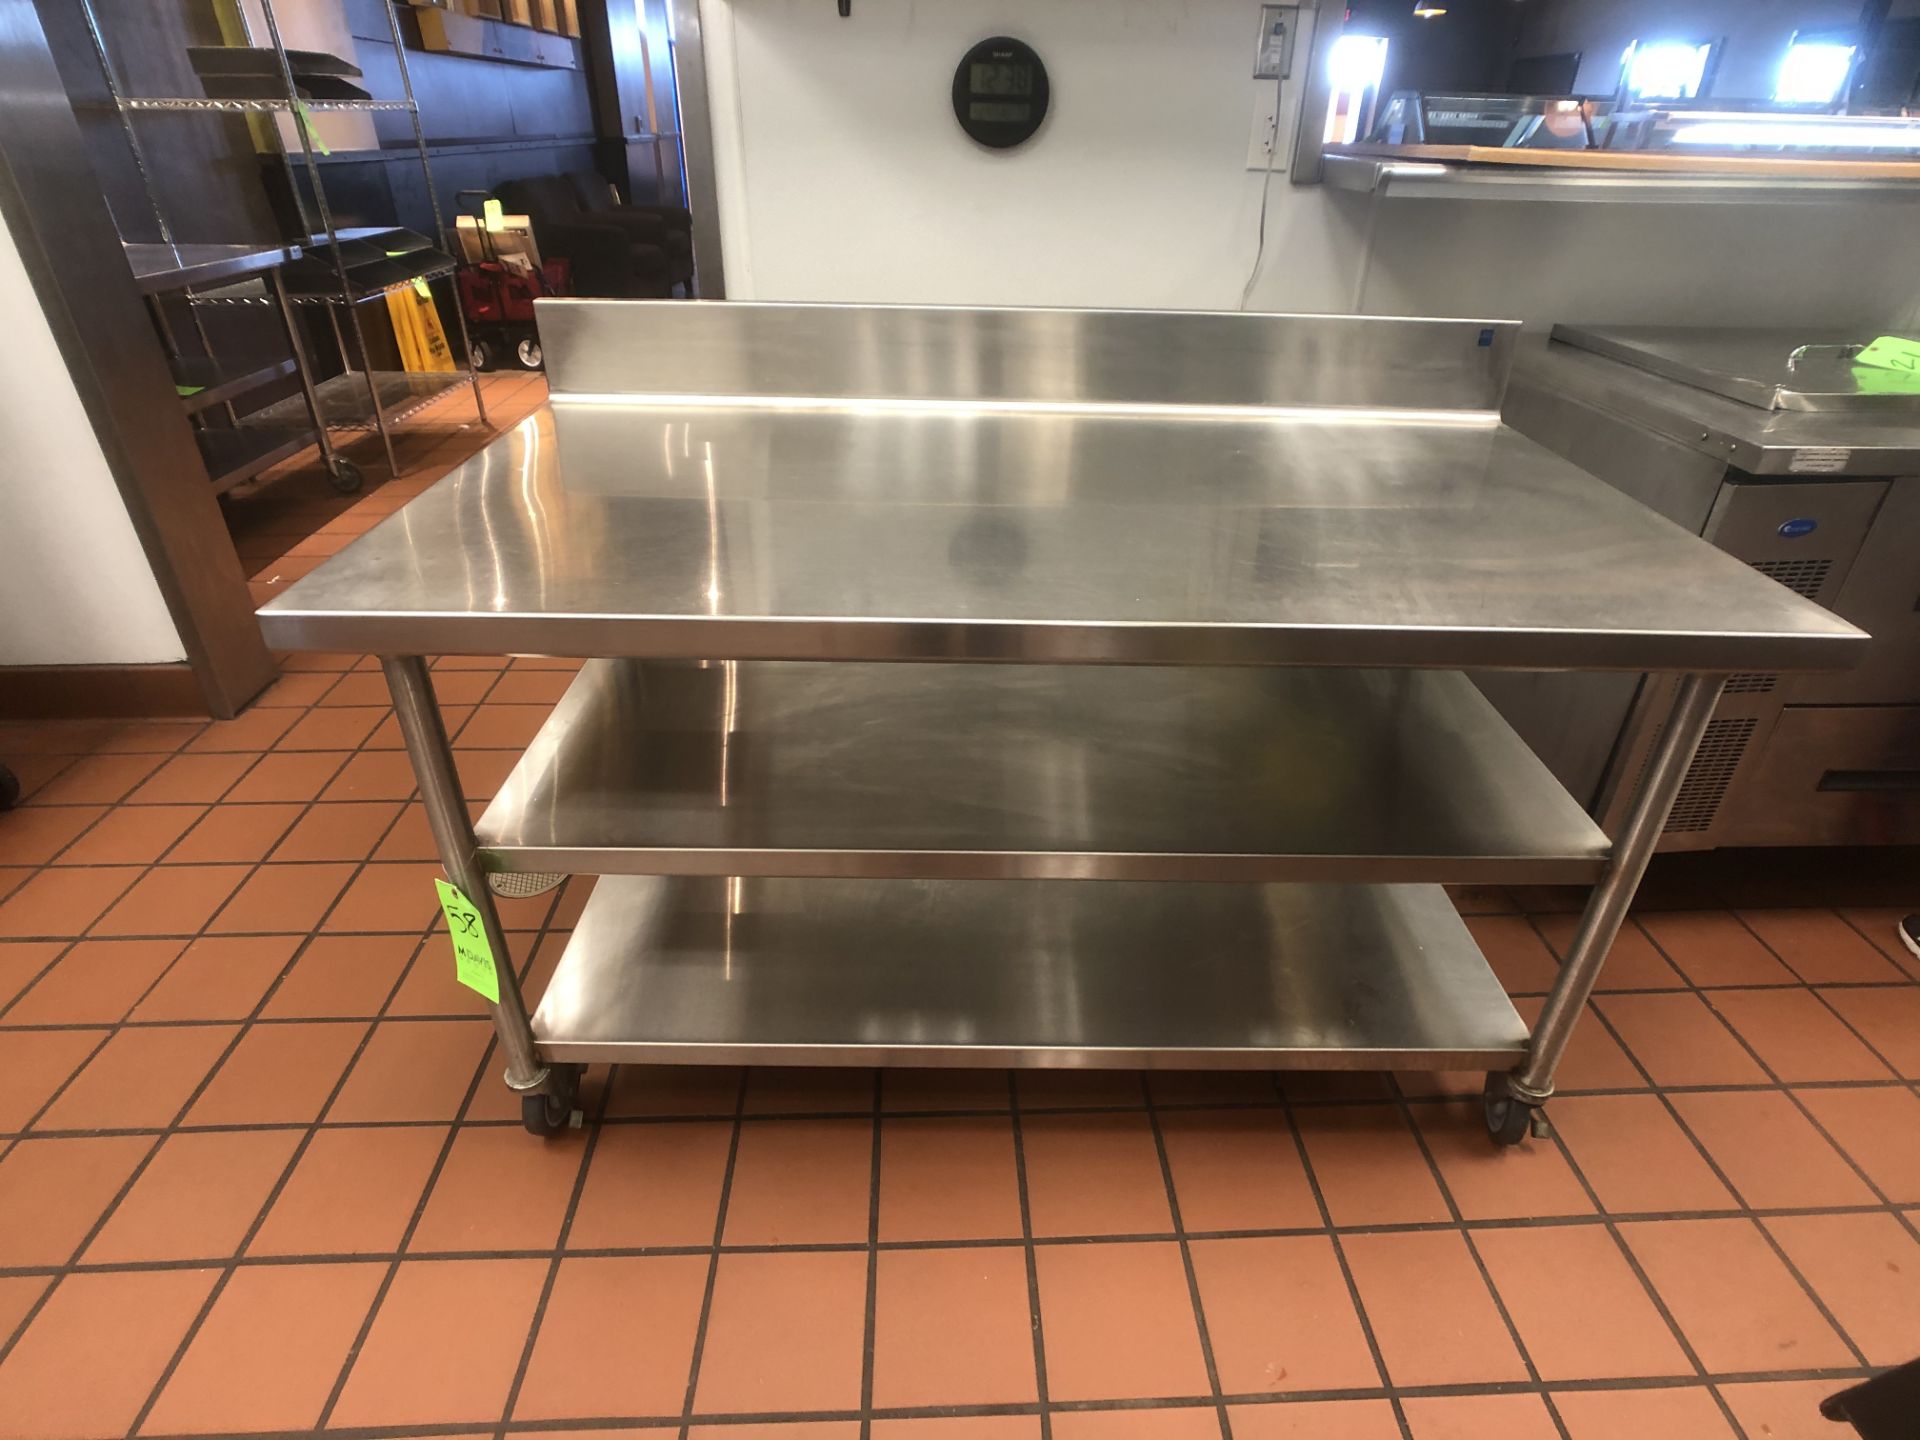 S/S Table with Racks and S/S Backsplash, Approx. 60" L x 32" W, Mounted on Casters